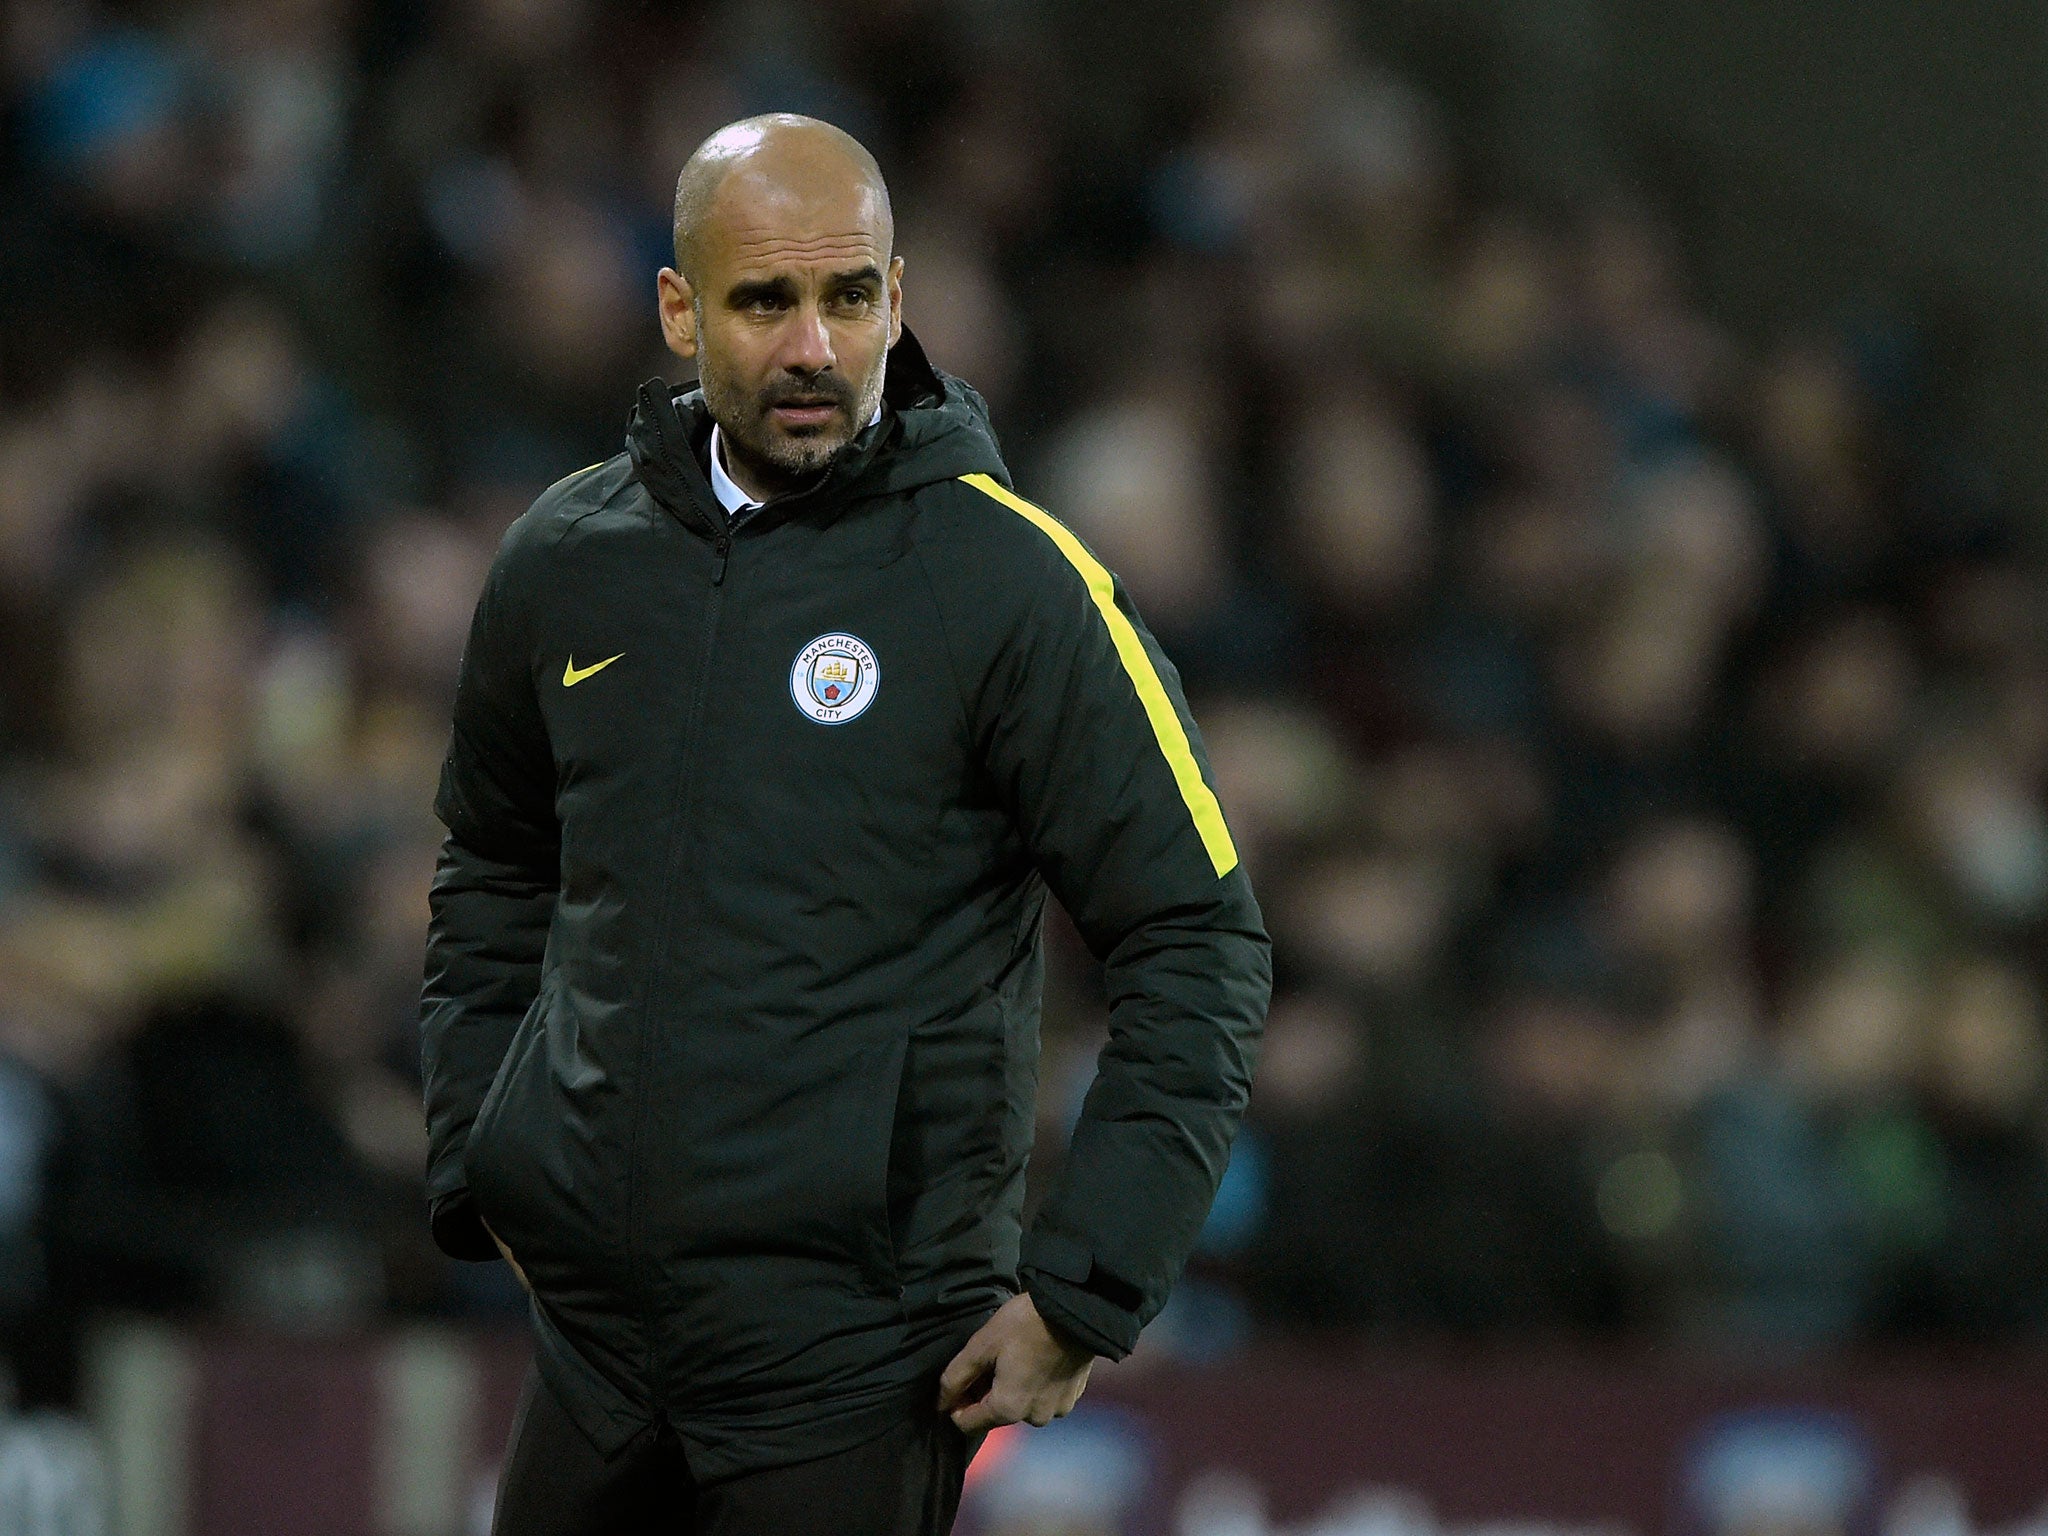 Guardiola has come under scrutiny in recent weeks